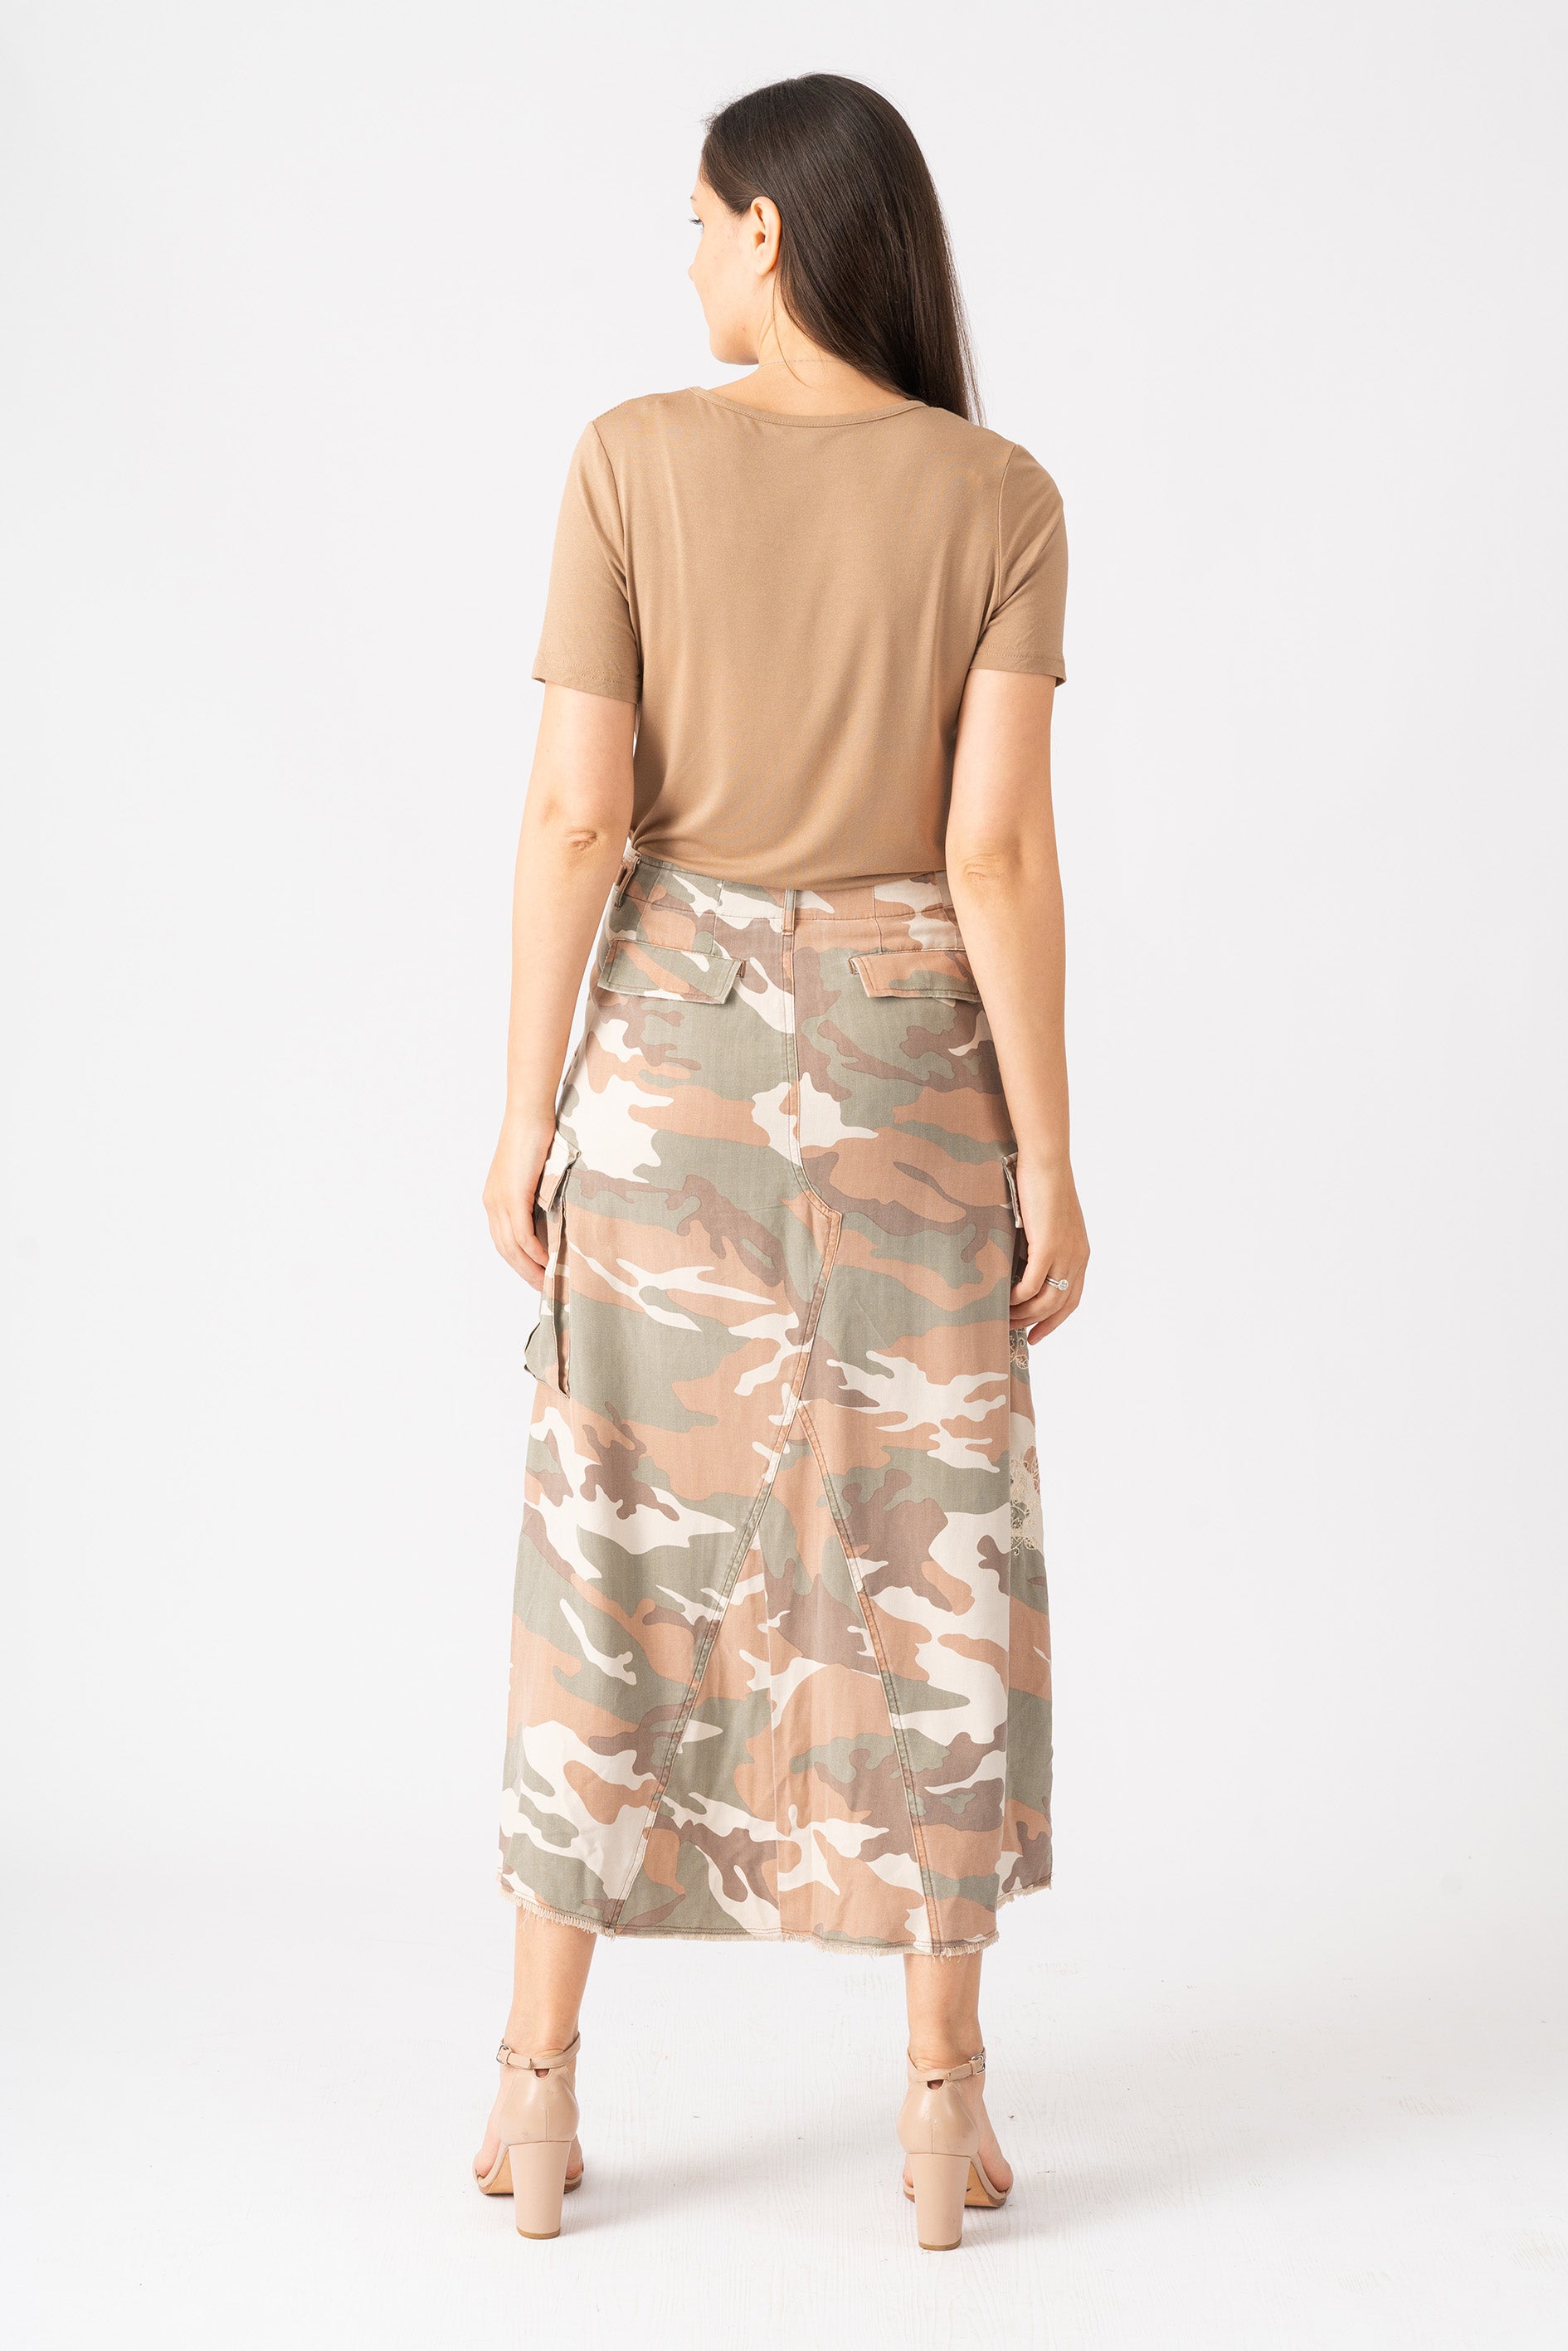 100% Silk long skirt with embroidery in Cream Camo